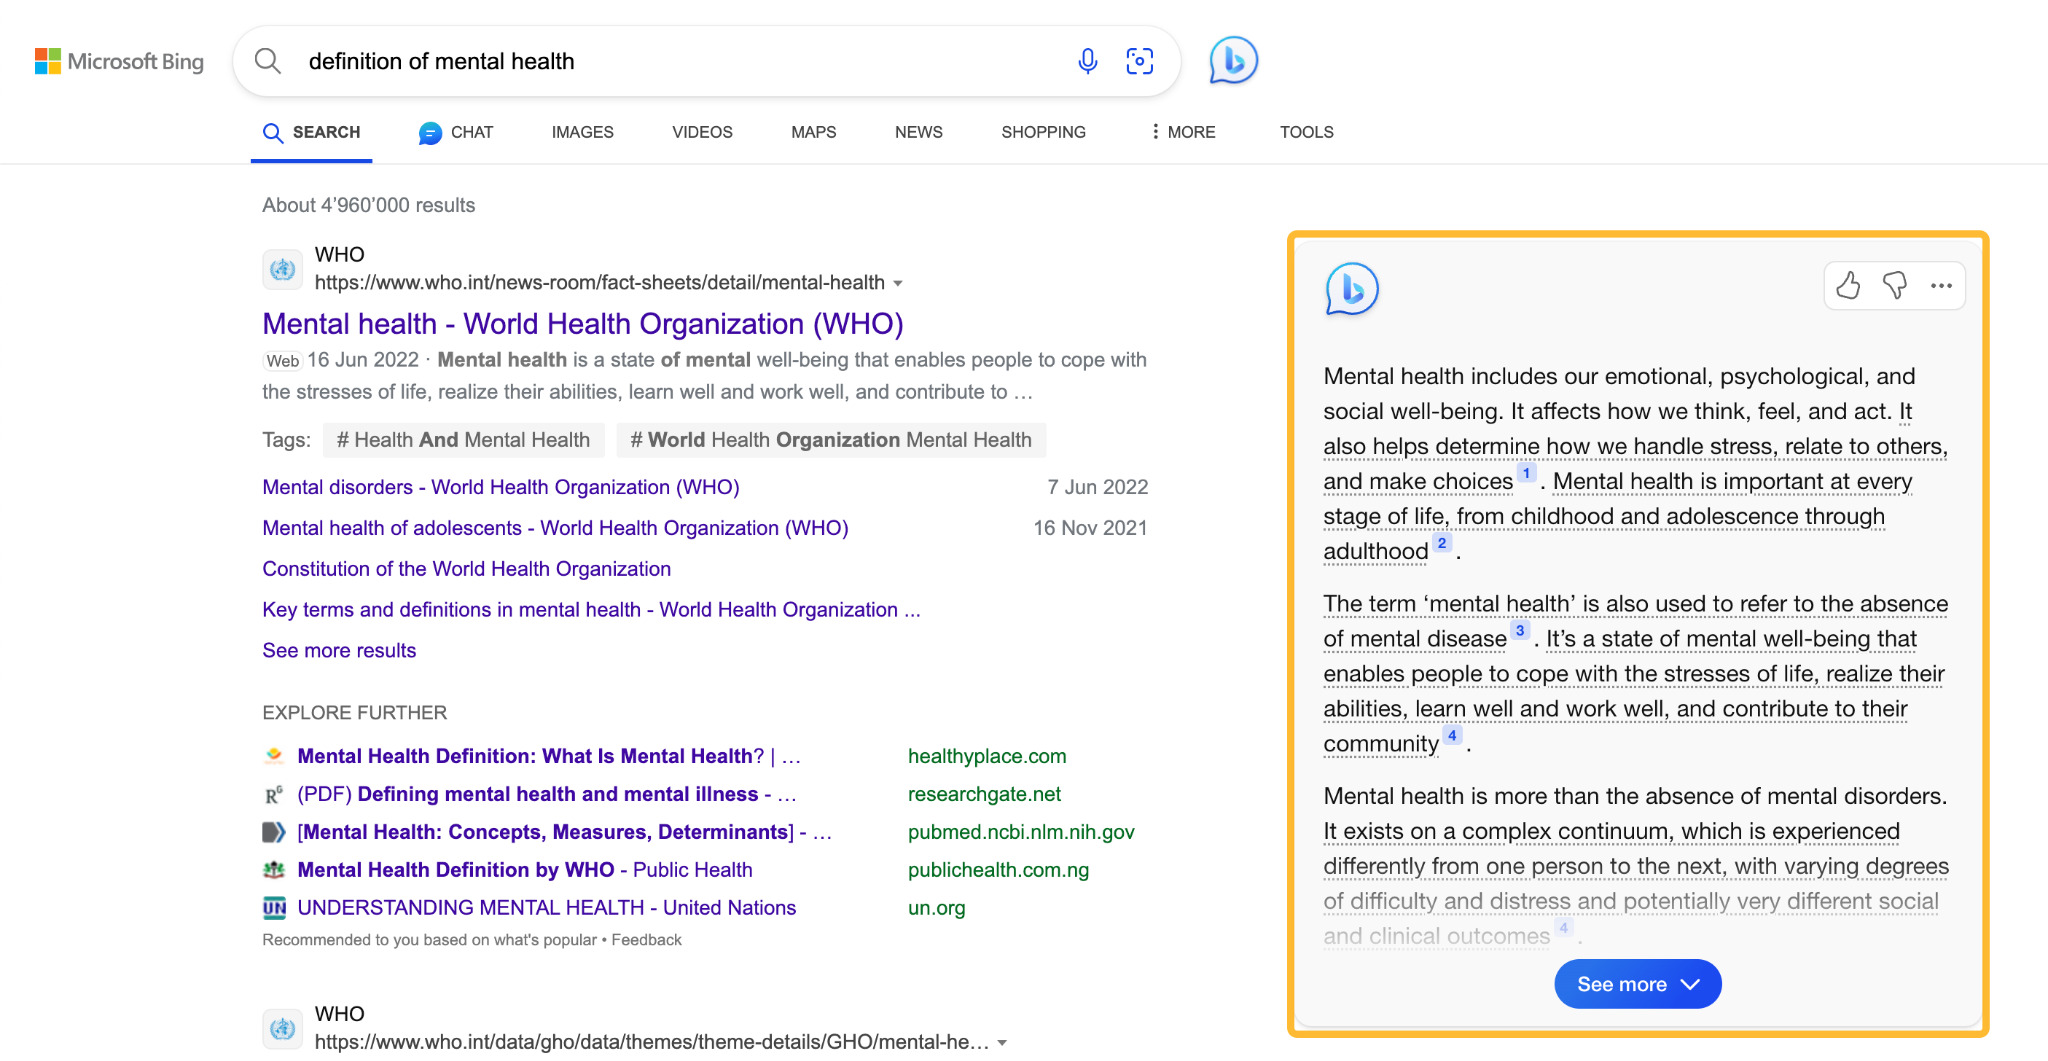 Bing's search results for "definition of mental health"